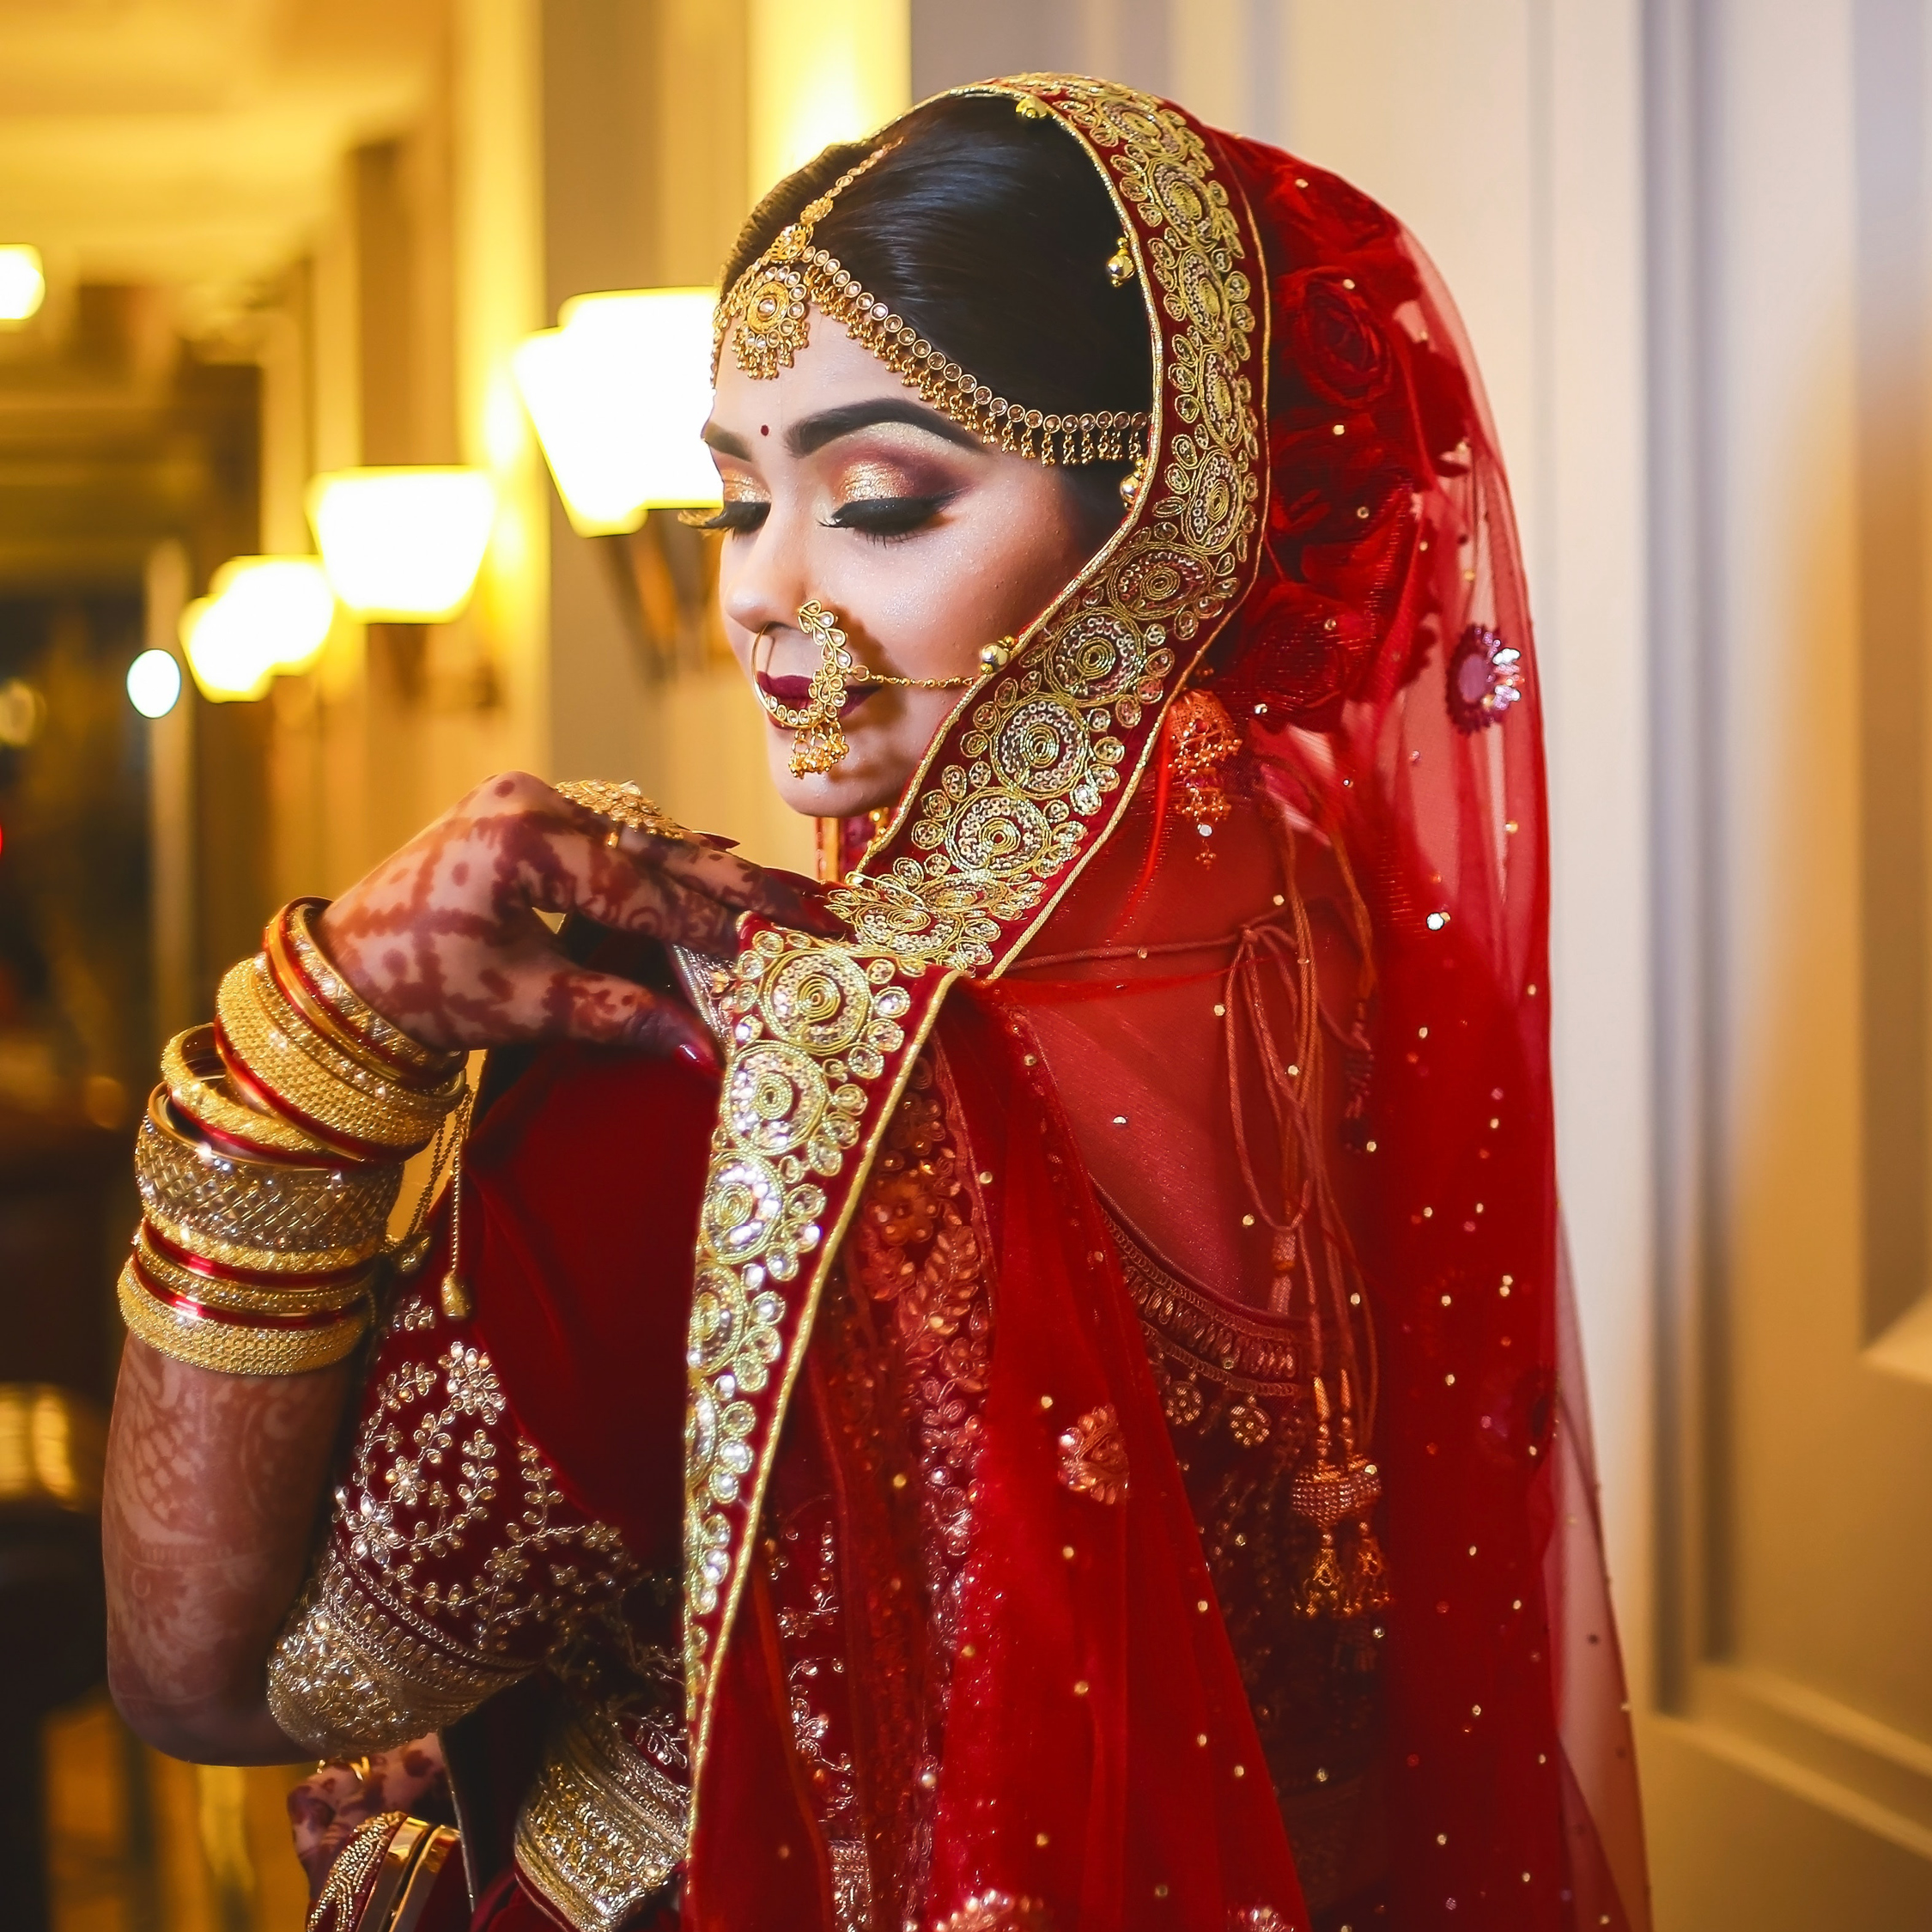 Bridal outfits for Indian weddings